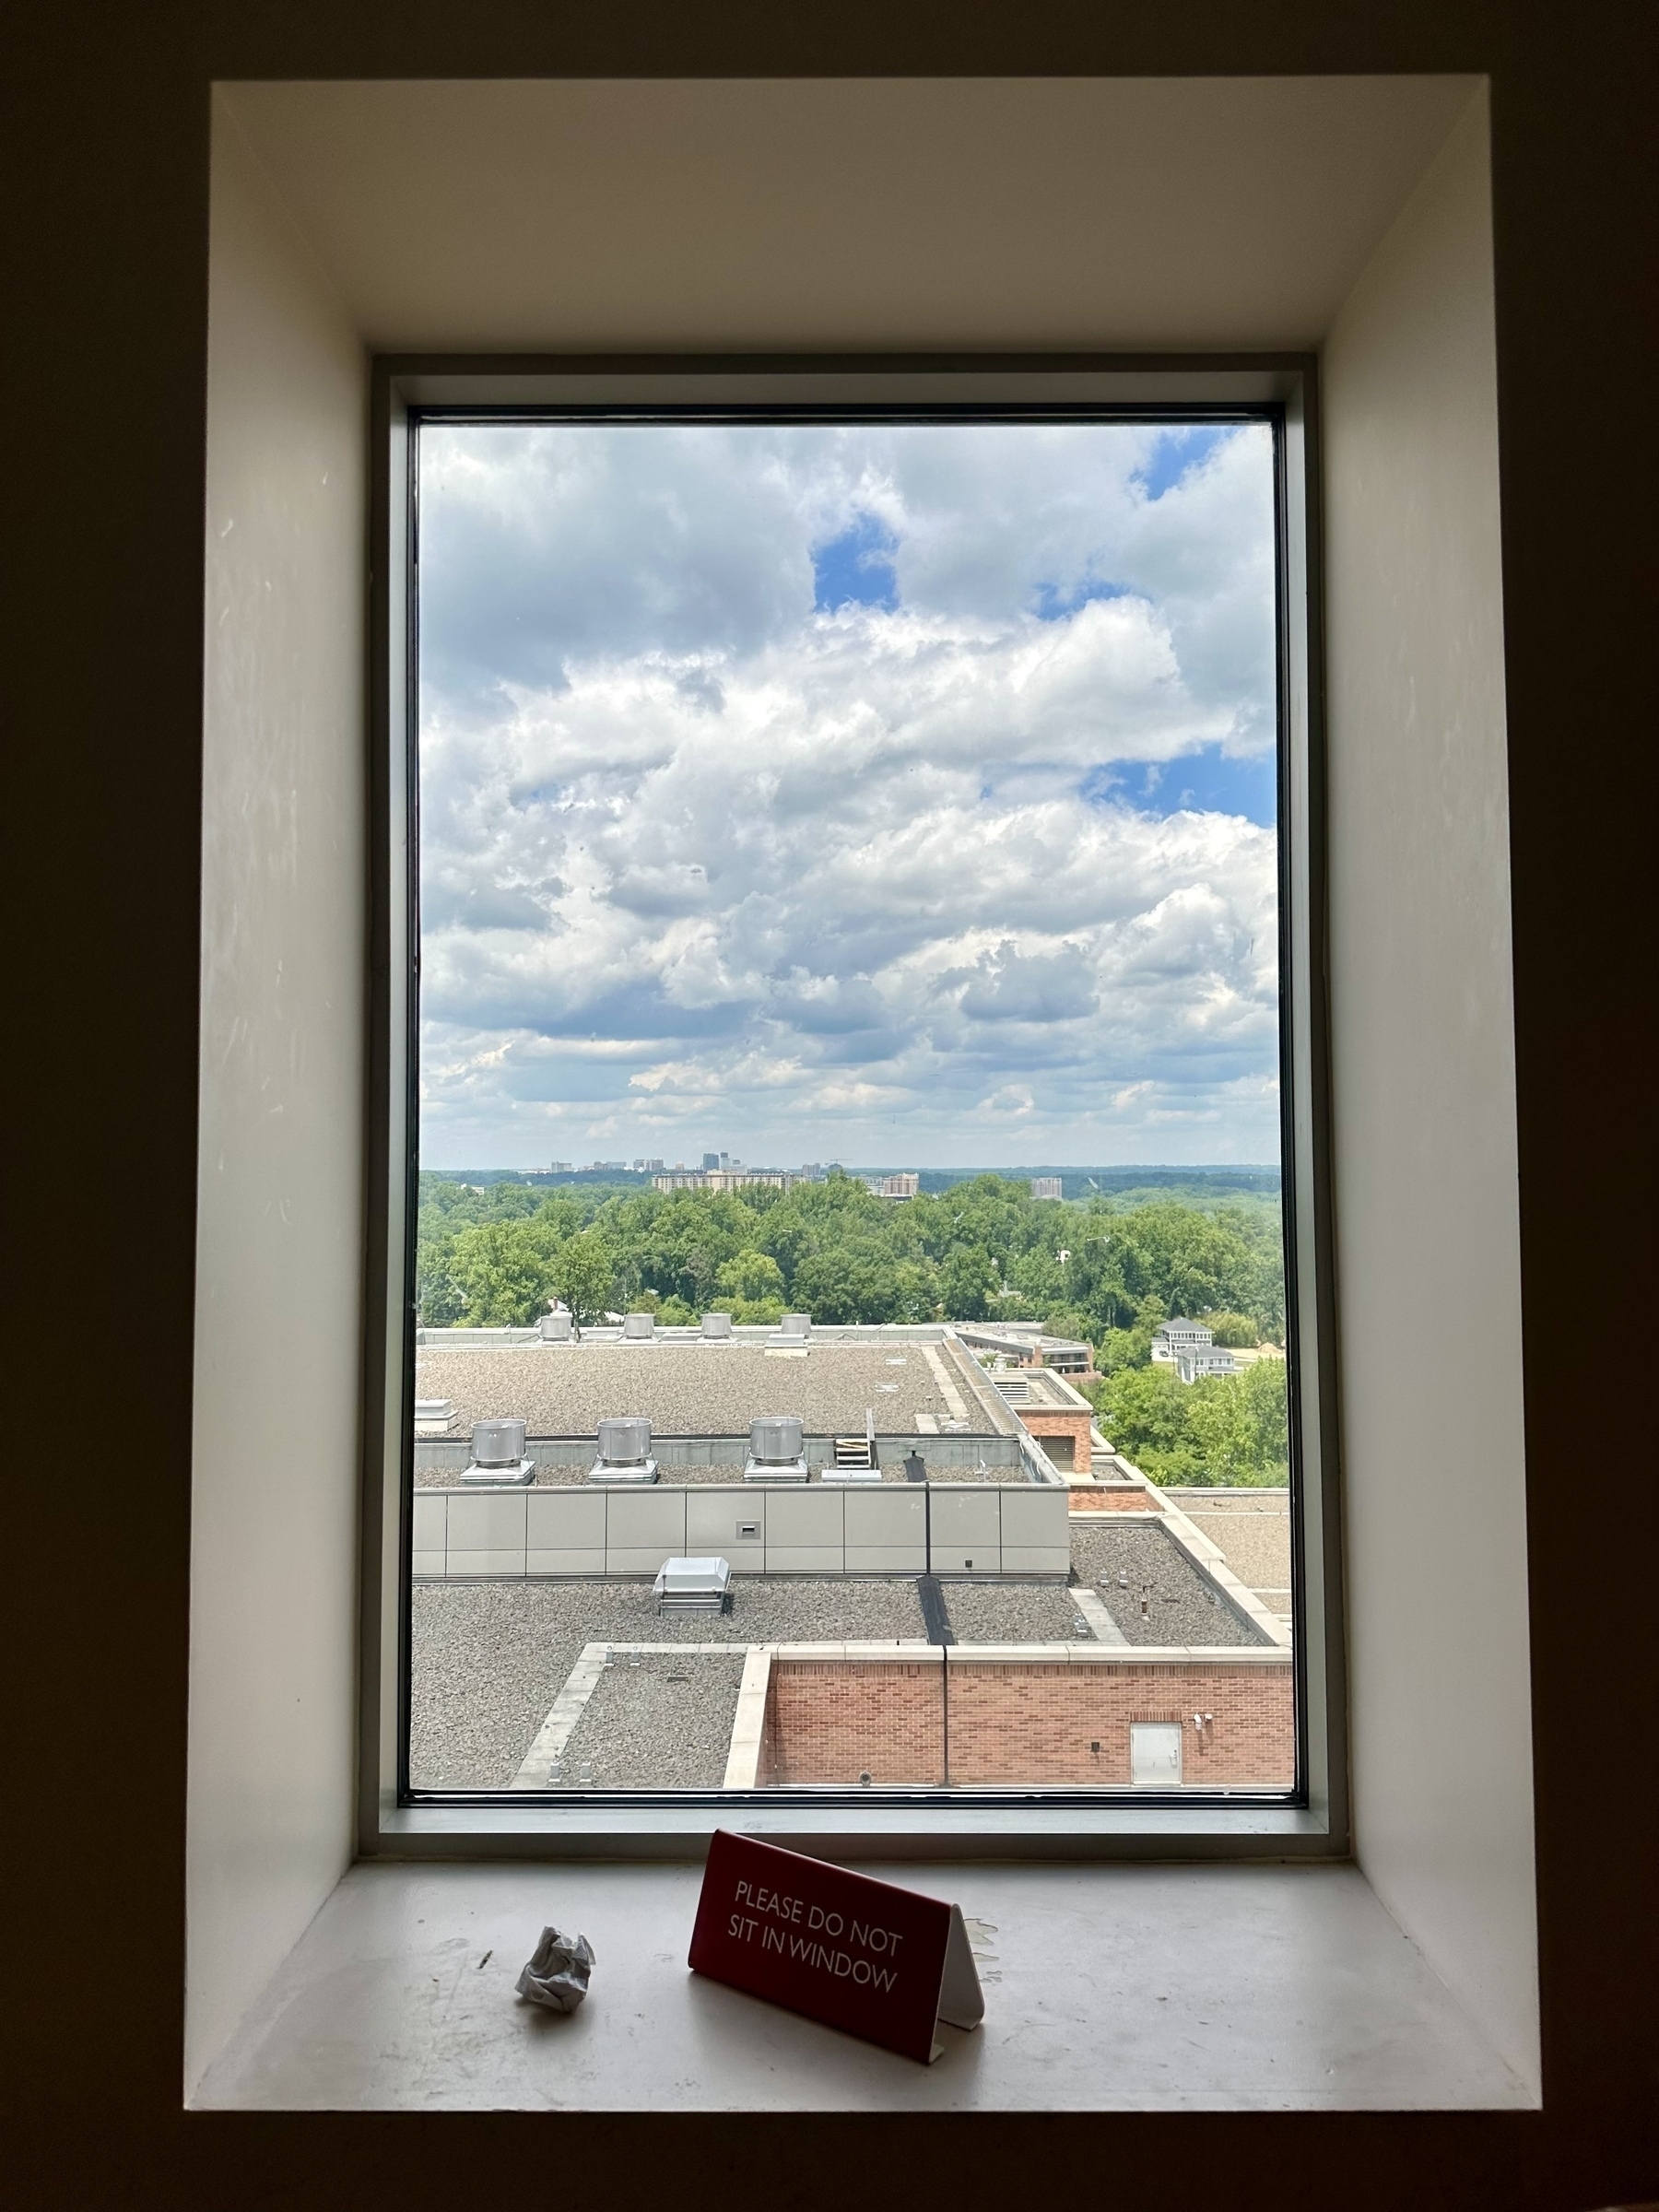 A window offers a view of an outside landscape with trees, buildings, and a partly cloudy sky, while a sign on the windowsill warns "PLEASE DO NOT SIT IN WINDOW."